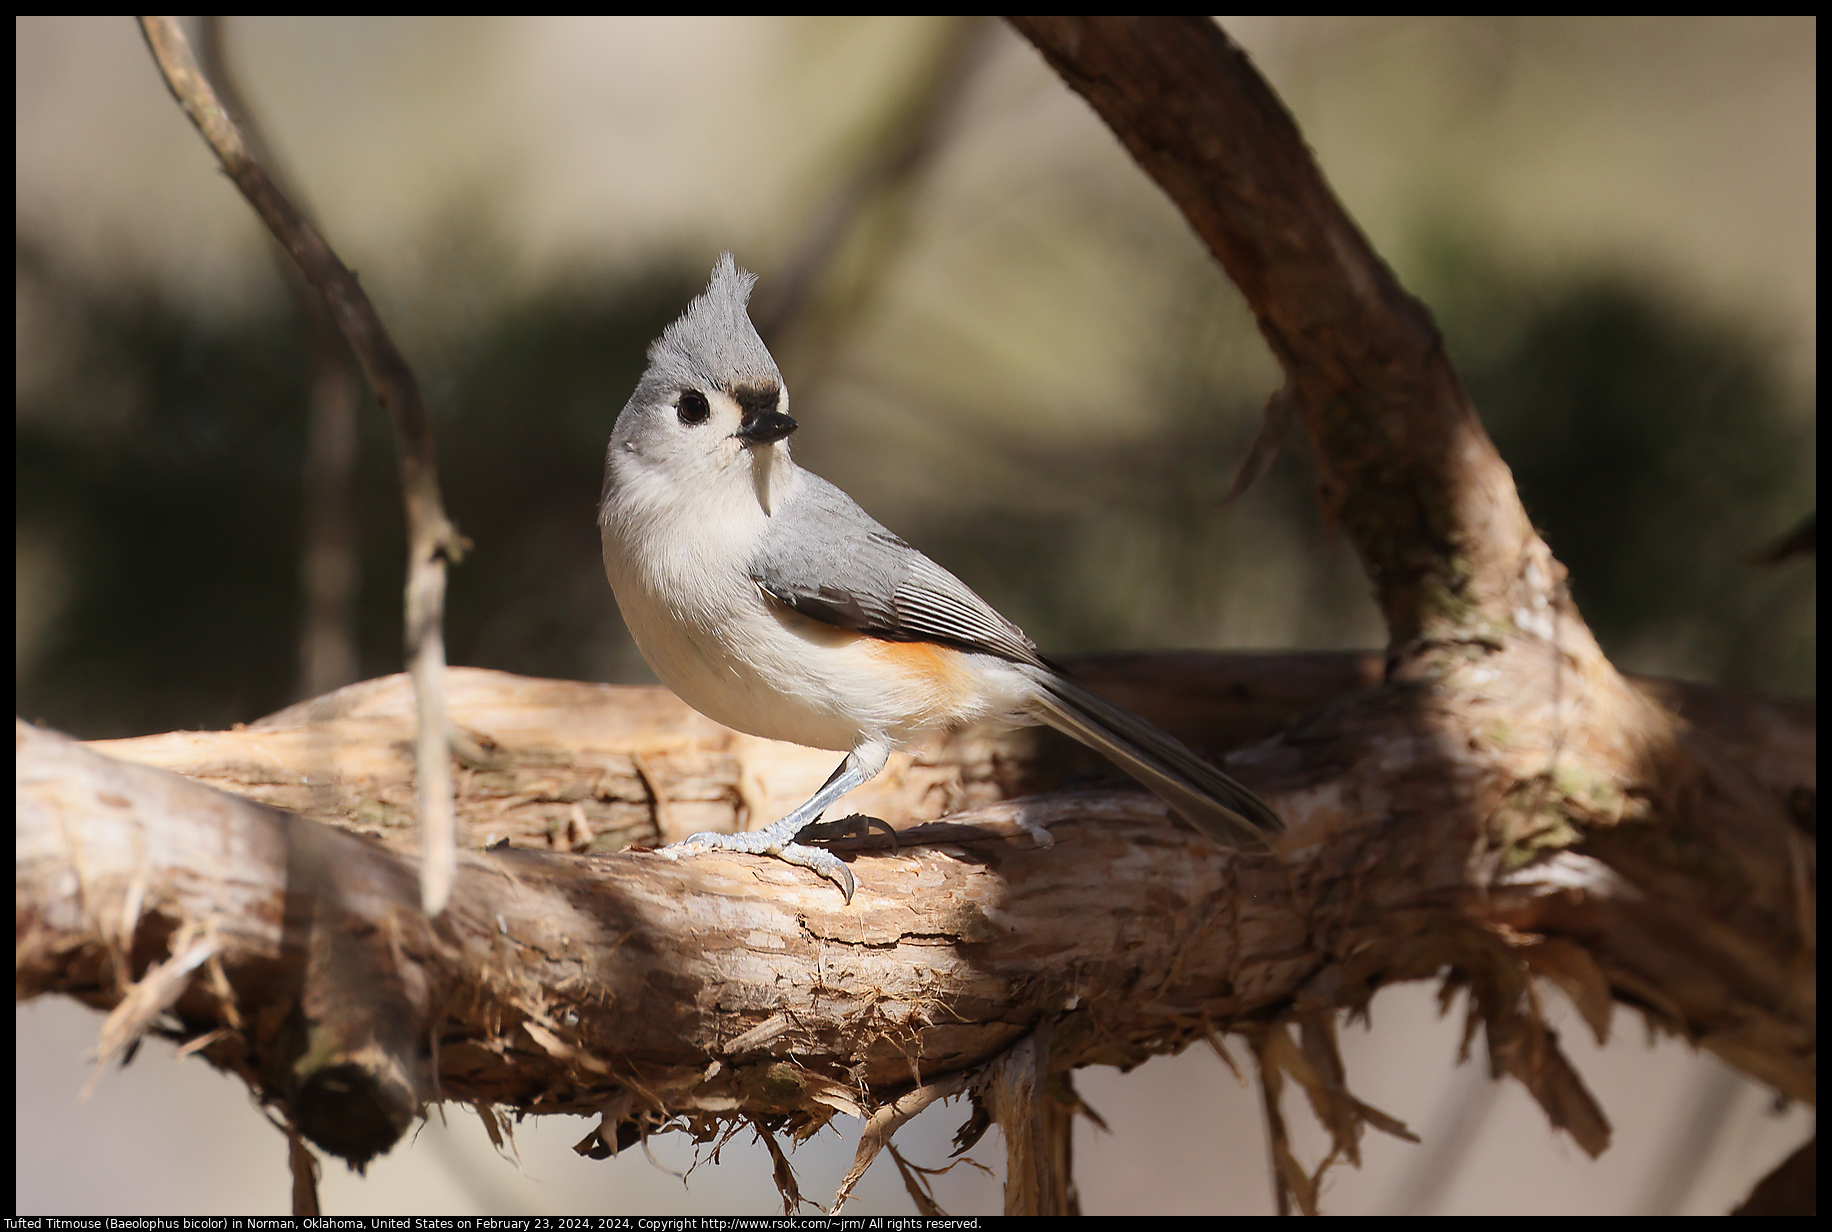 Tufted Titmouse (Baeolophus bicolor) in Norman, Oklahoma, United States on February 23, 2024